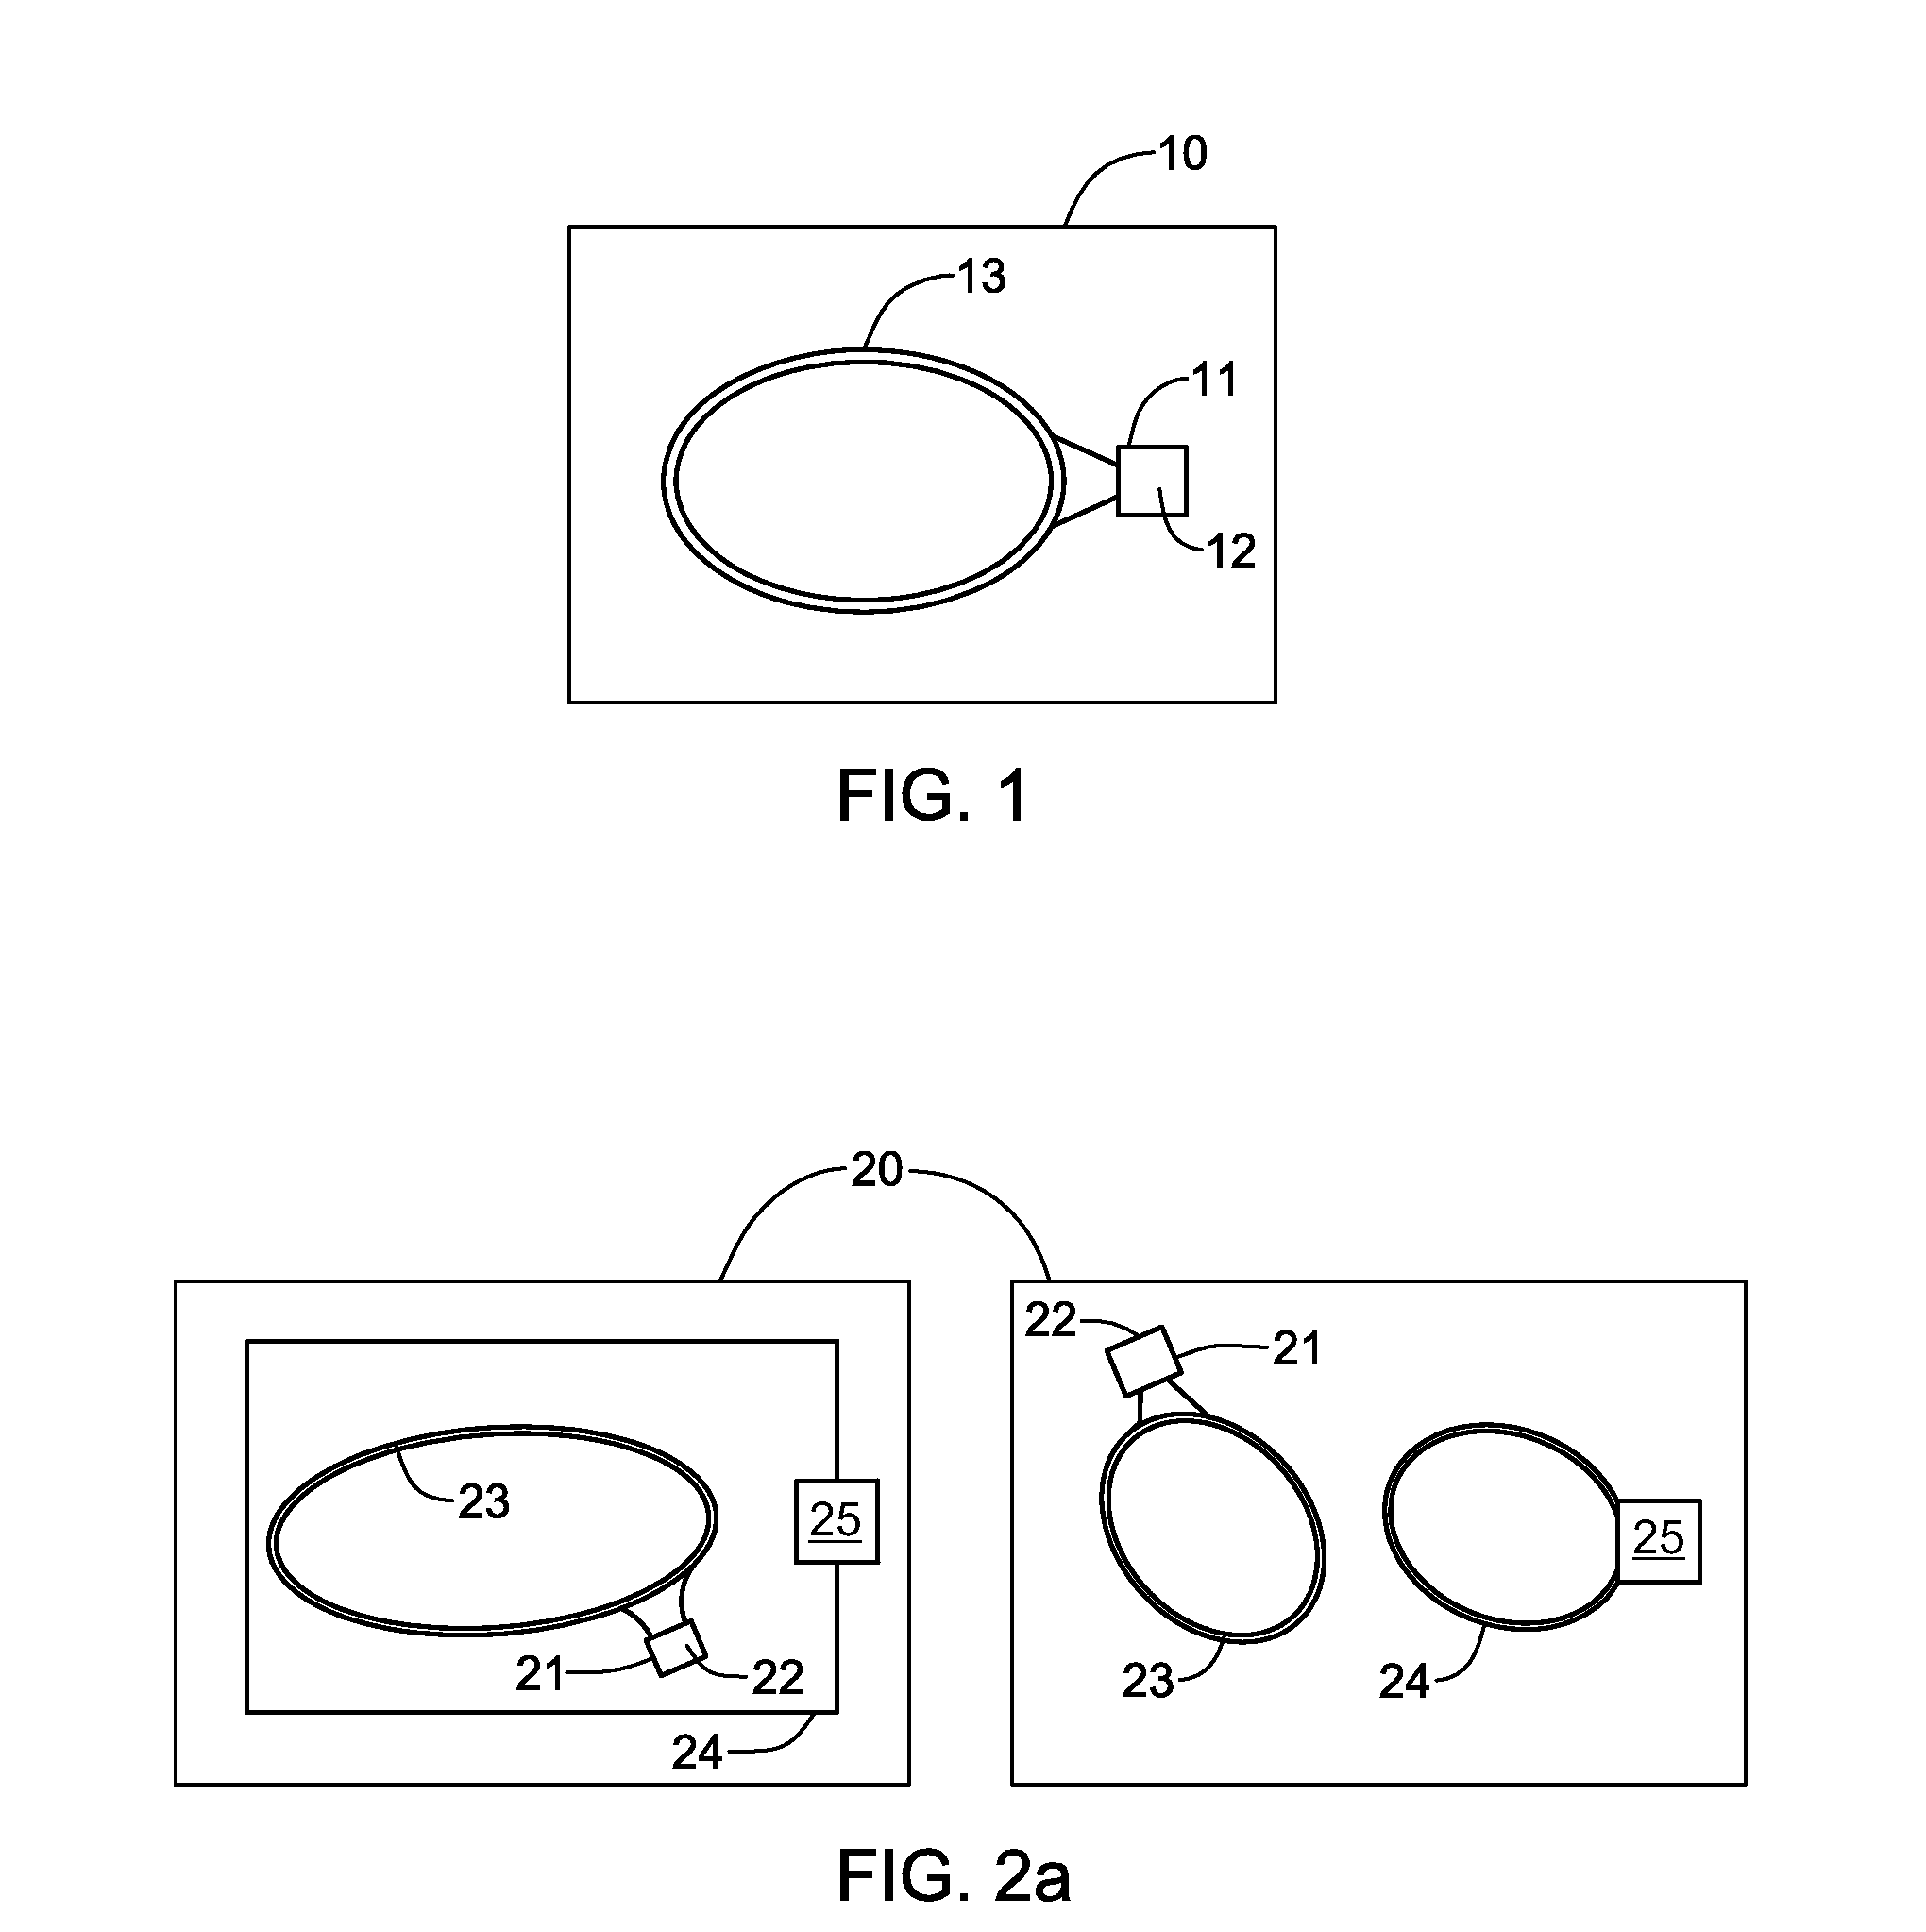 Method and System for Detecting Duress Using Proximity Card